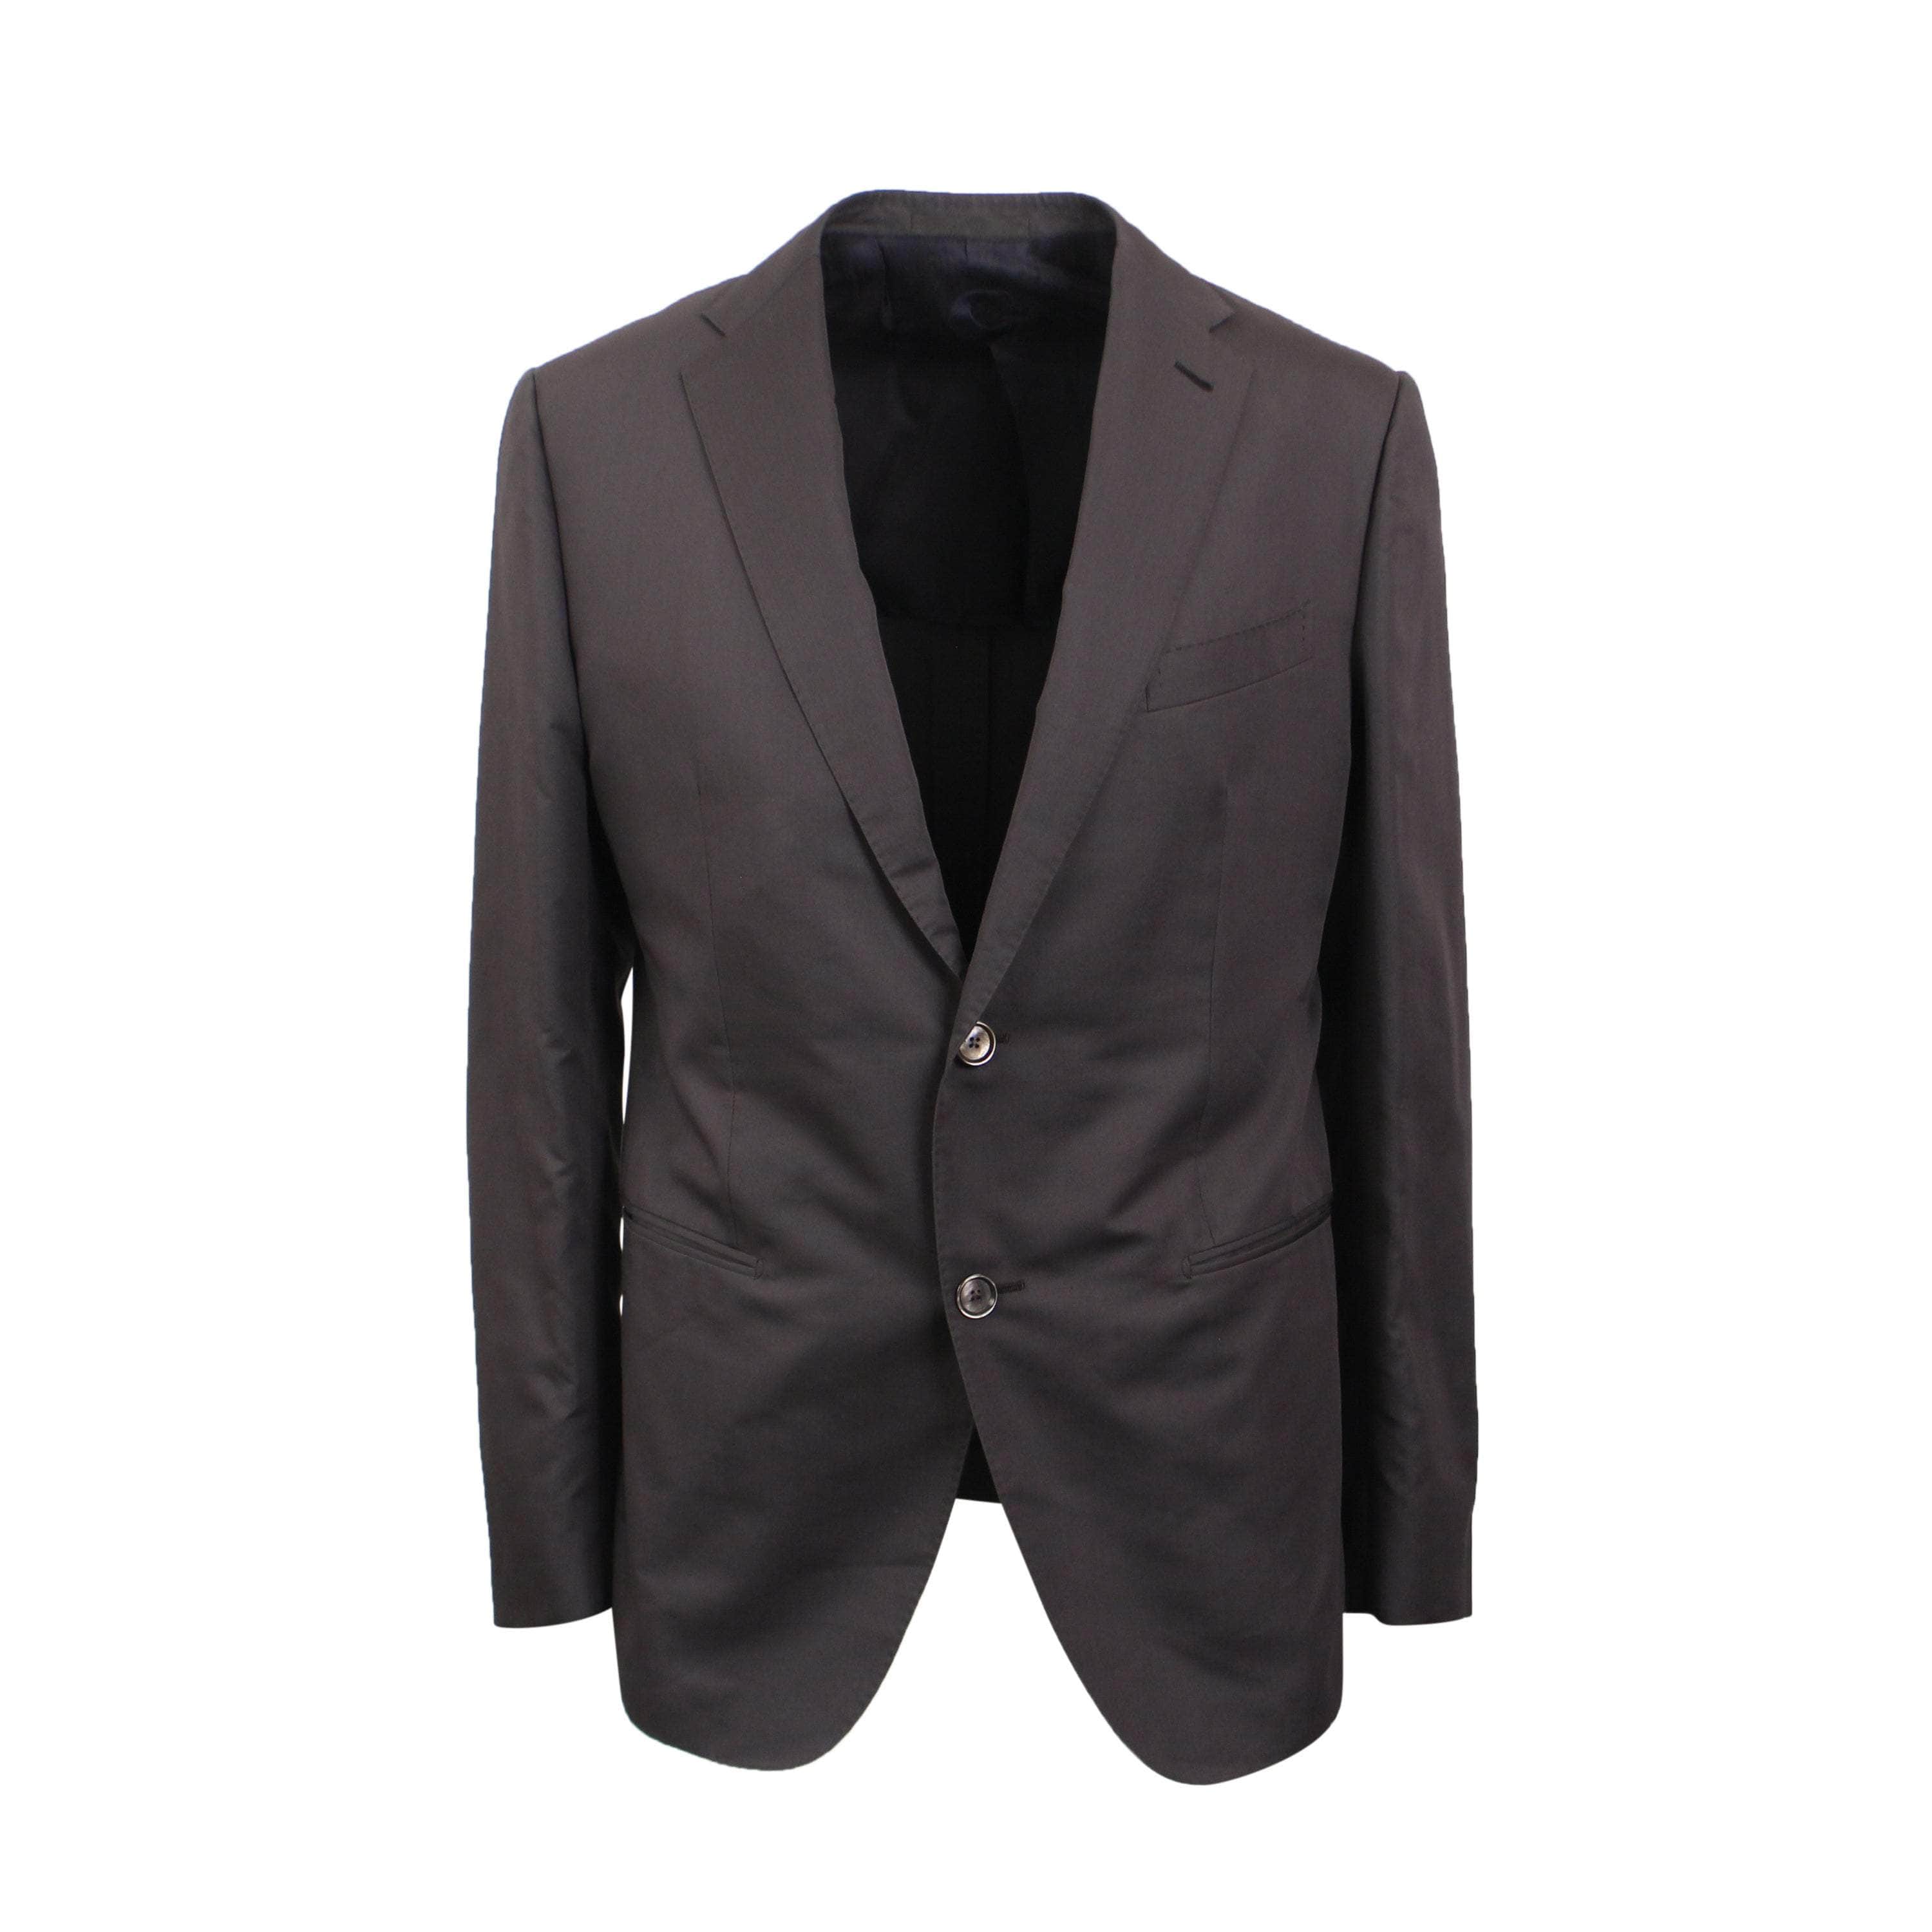 Caruso 500-750, caruso, channelenable-all, chicmi, couponcollection, main-clothing, shop375, size-50, Stadium Goods, stadiumgoods 50 Dark Grey Single Breasted Cotton & Silk Suit CRS-XTPS-0165/50 CRS-XTPS-0165/50